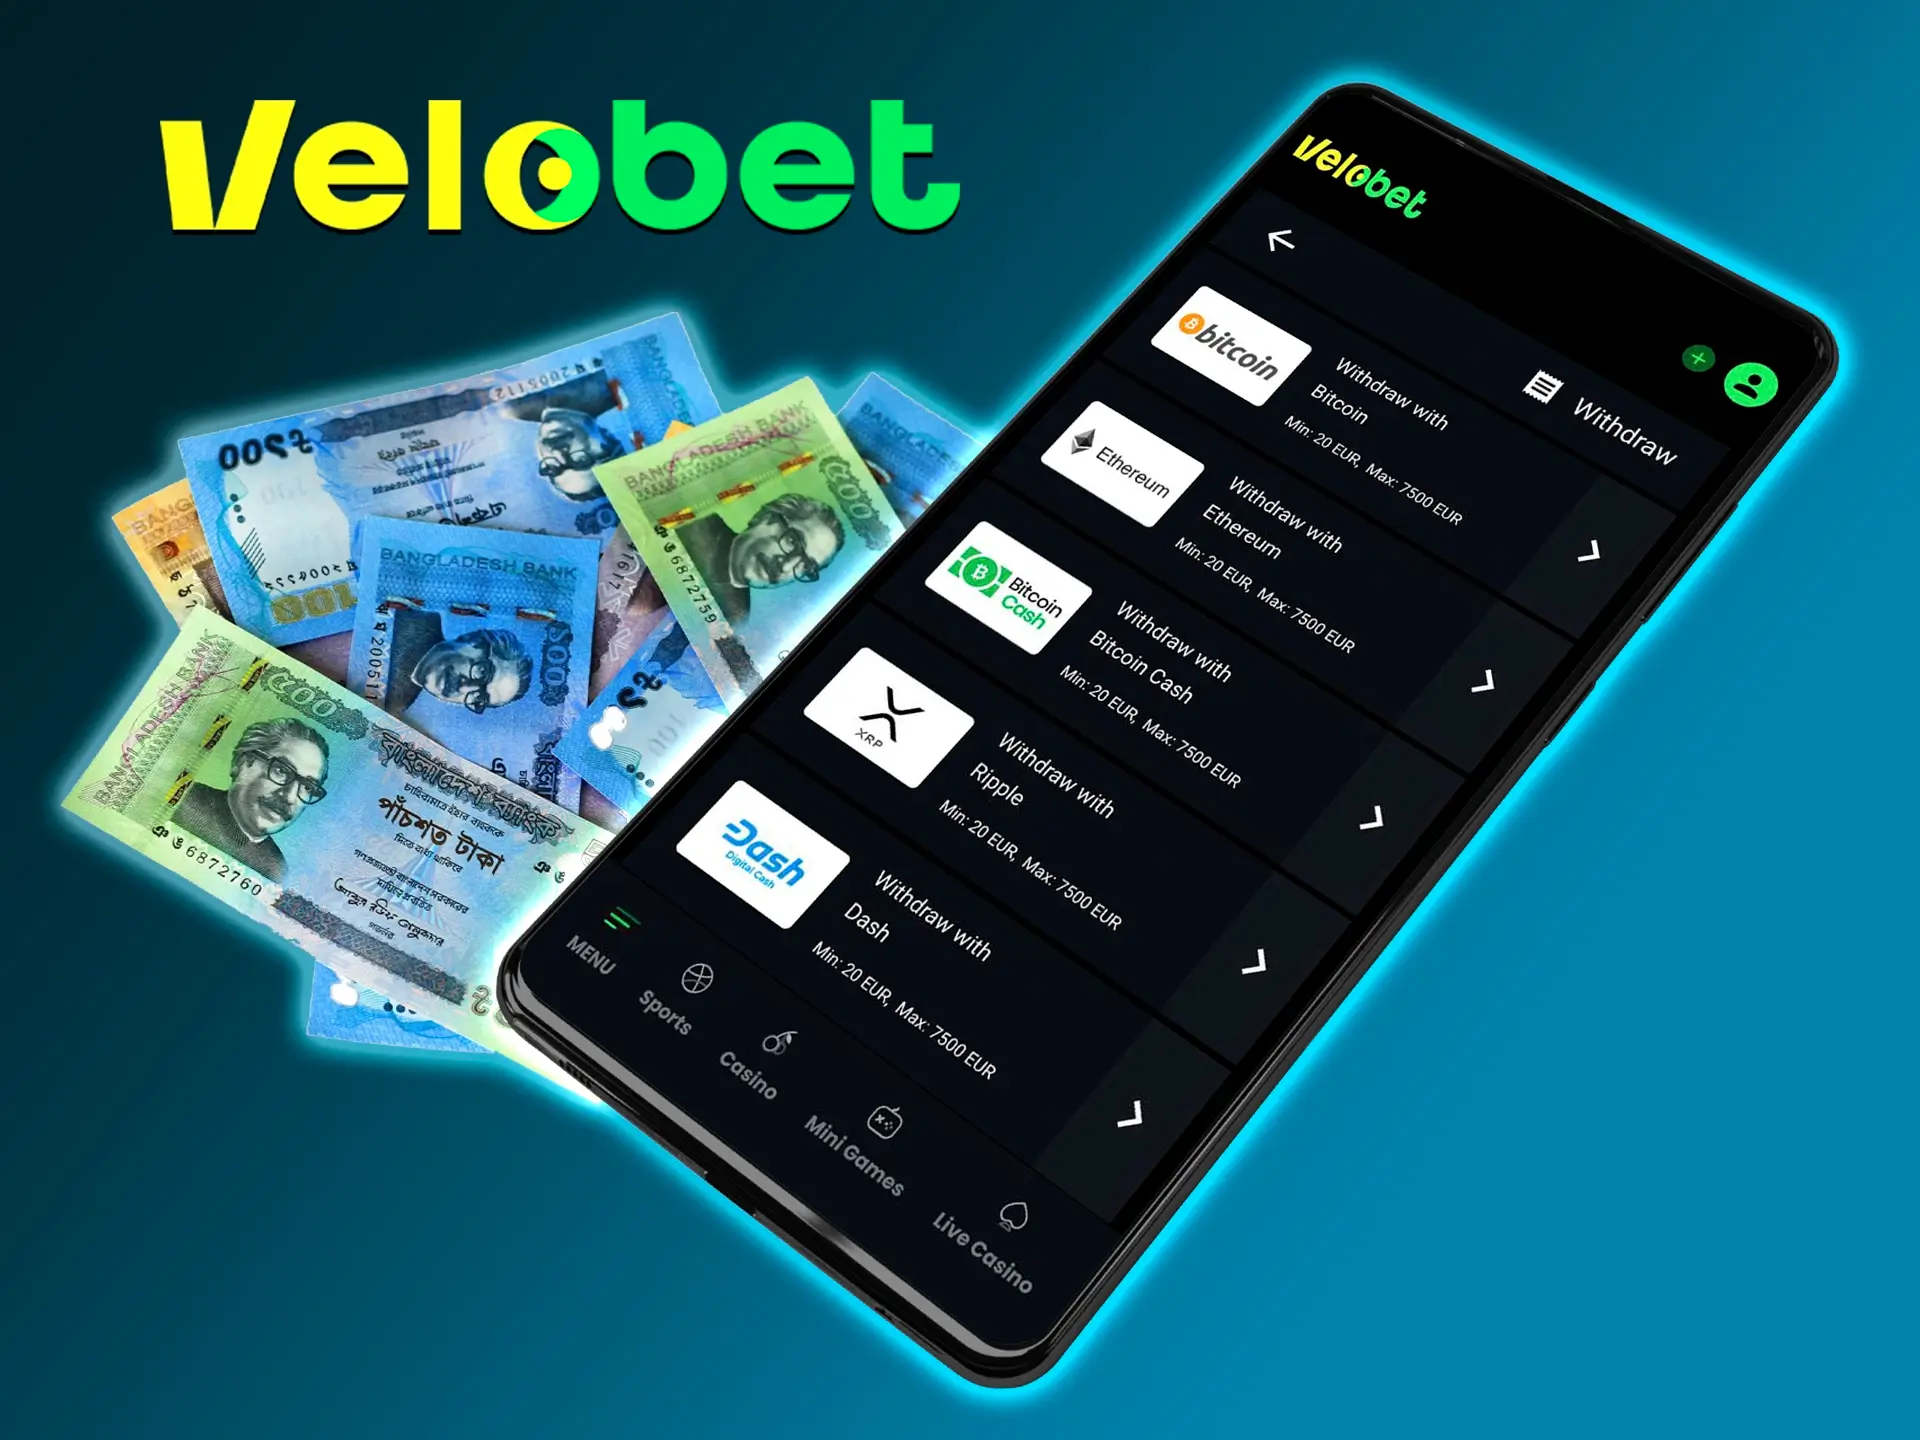 At any time you can instantly withdraw your winnings from Velobet in a convenient way.